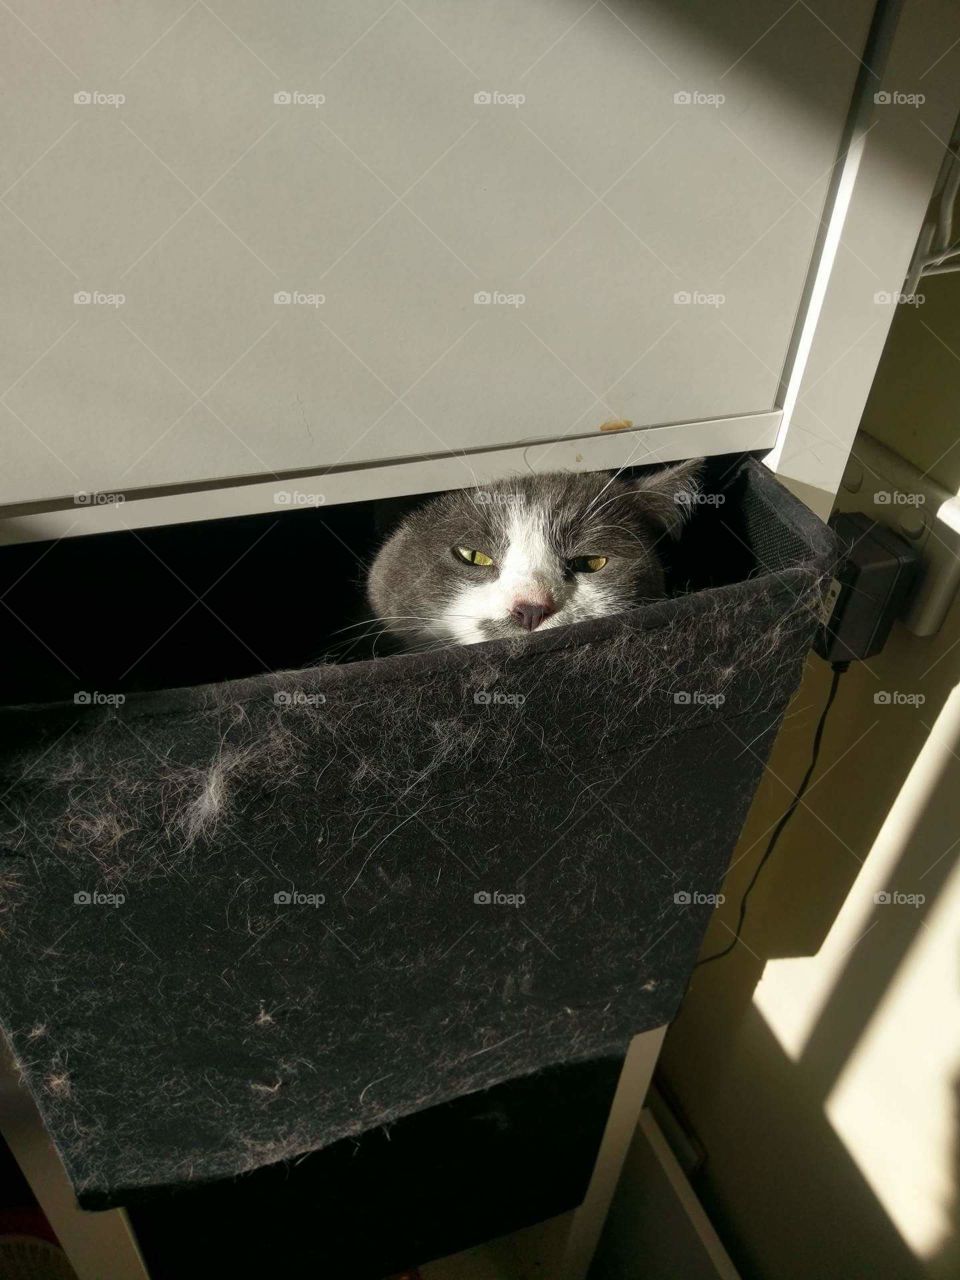 A cat sneaking a peak out of her hidey hole.